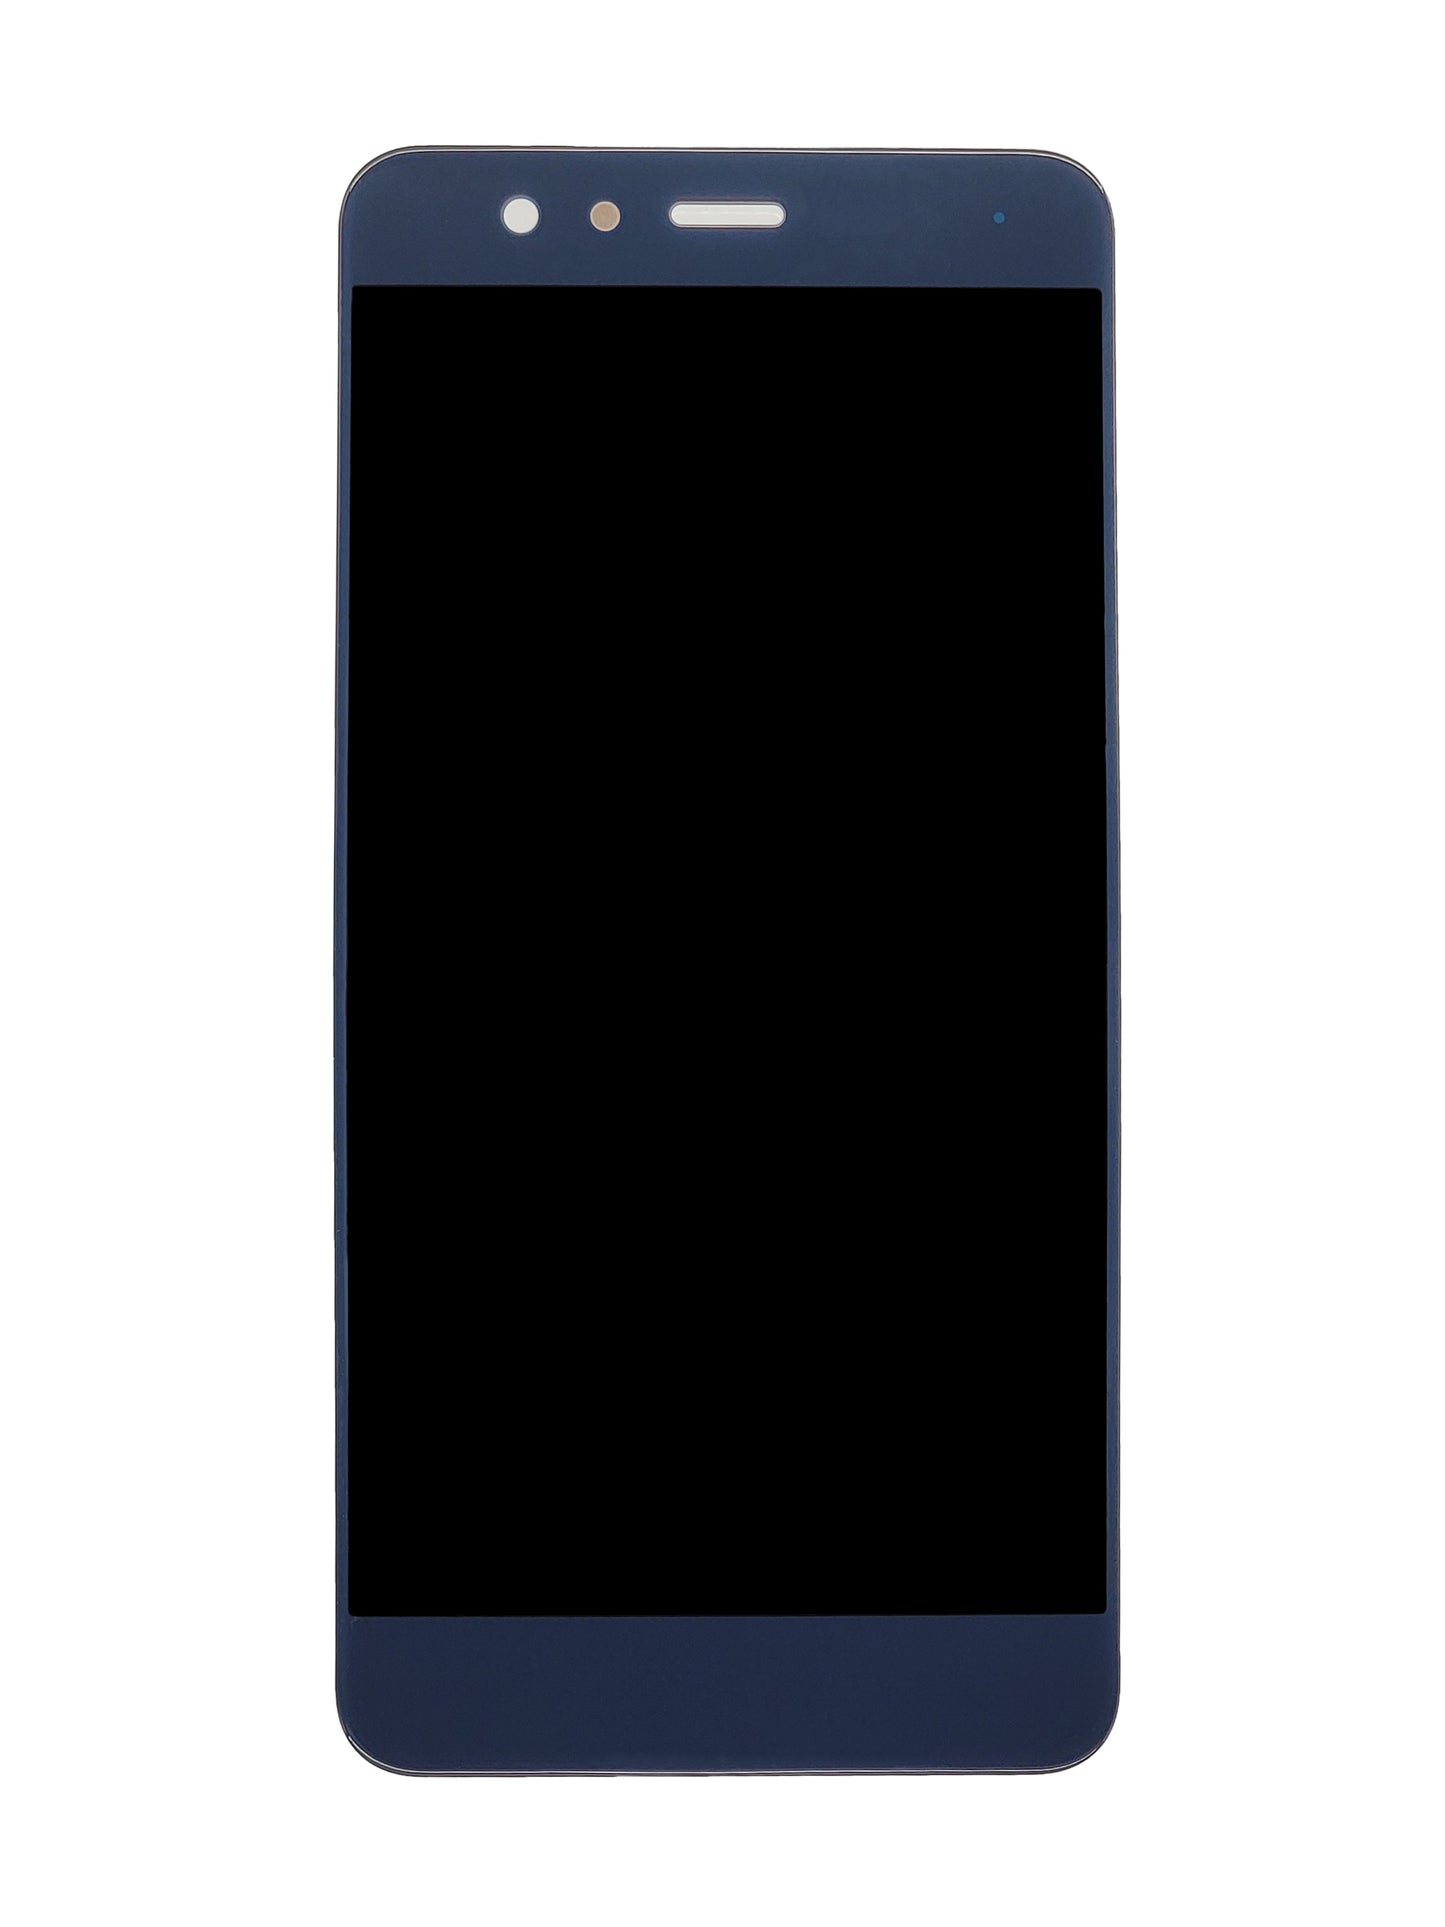 HW P10 Lite Screen Assembly (Without The Frame) (Refurbished) (Blue)